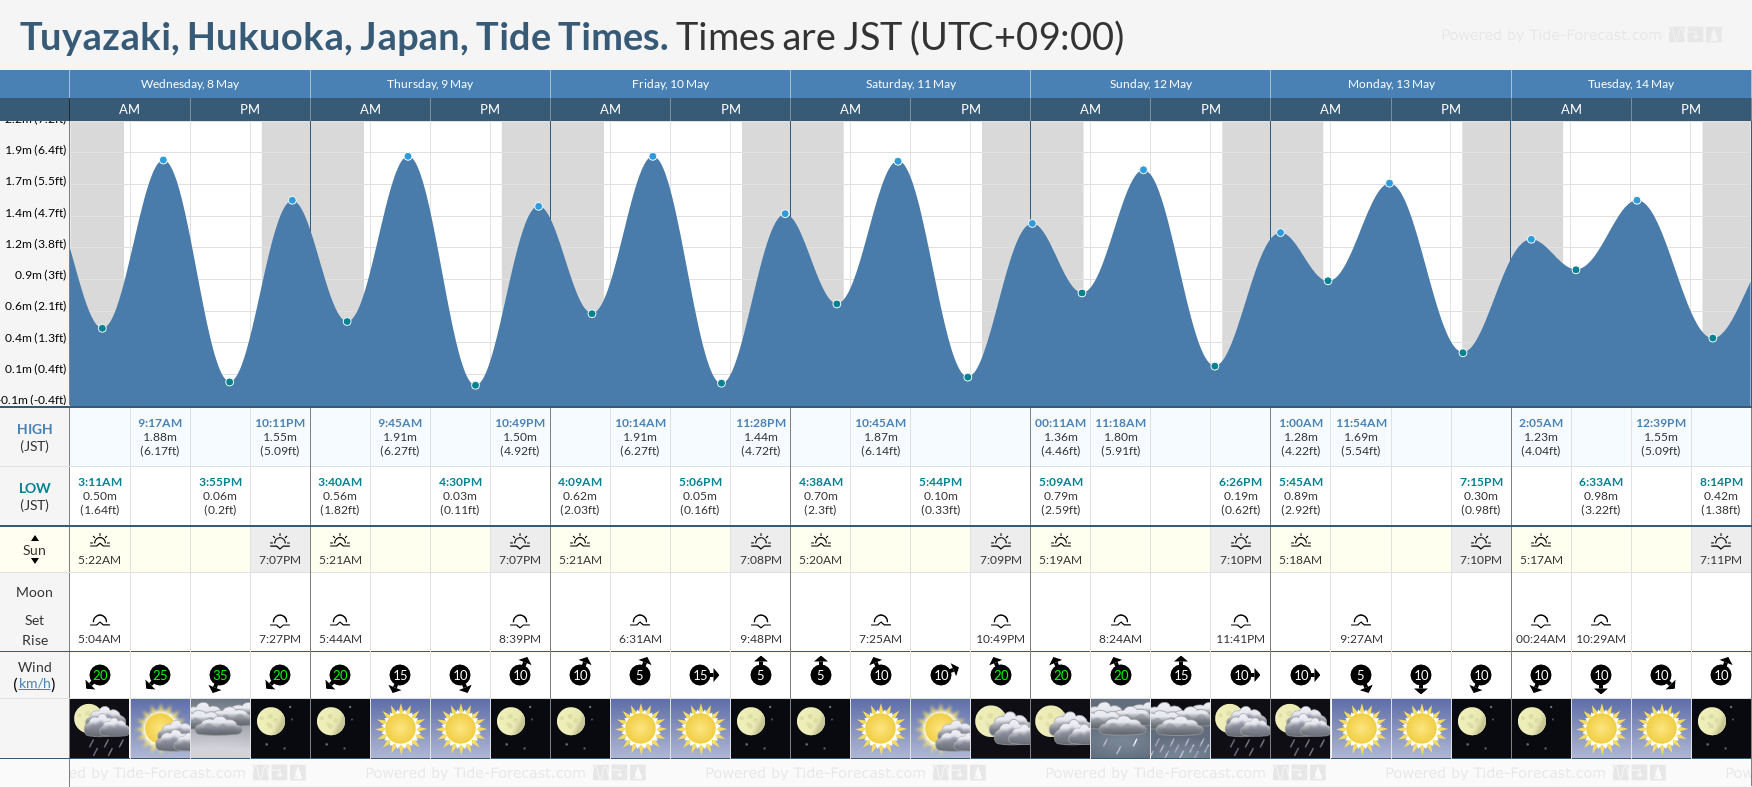 Tuyazaki, Hukuoka, Japan Tide Chart including high and low tide times for the next 7 days